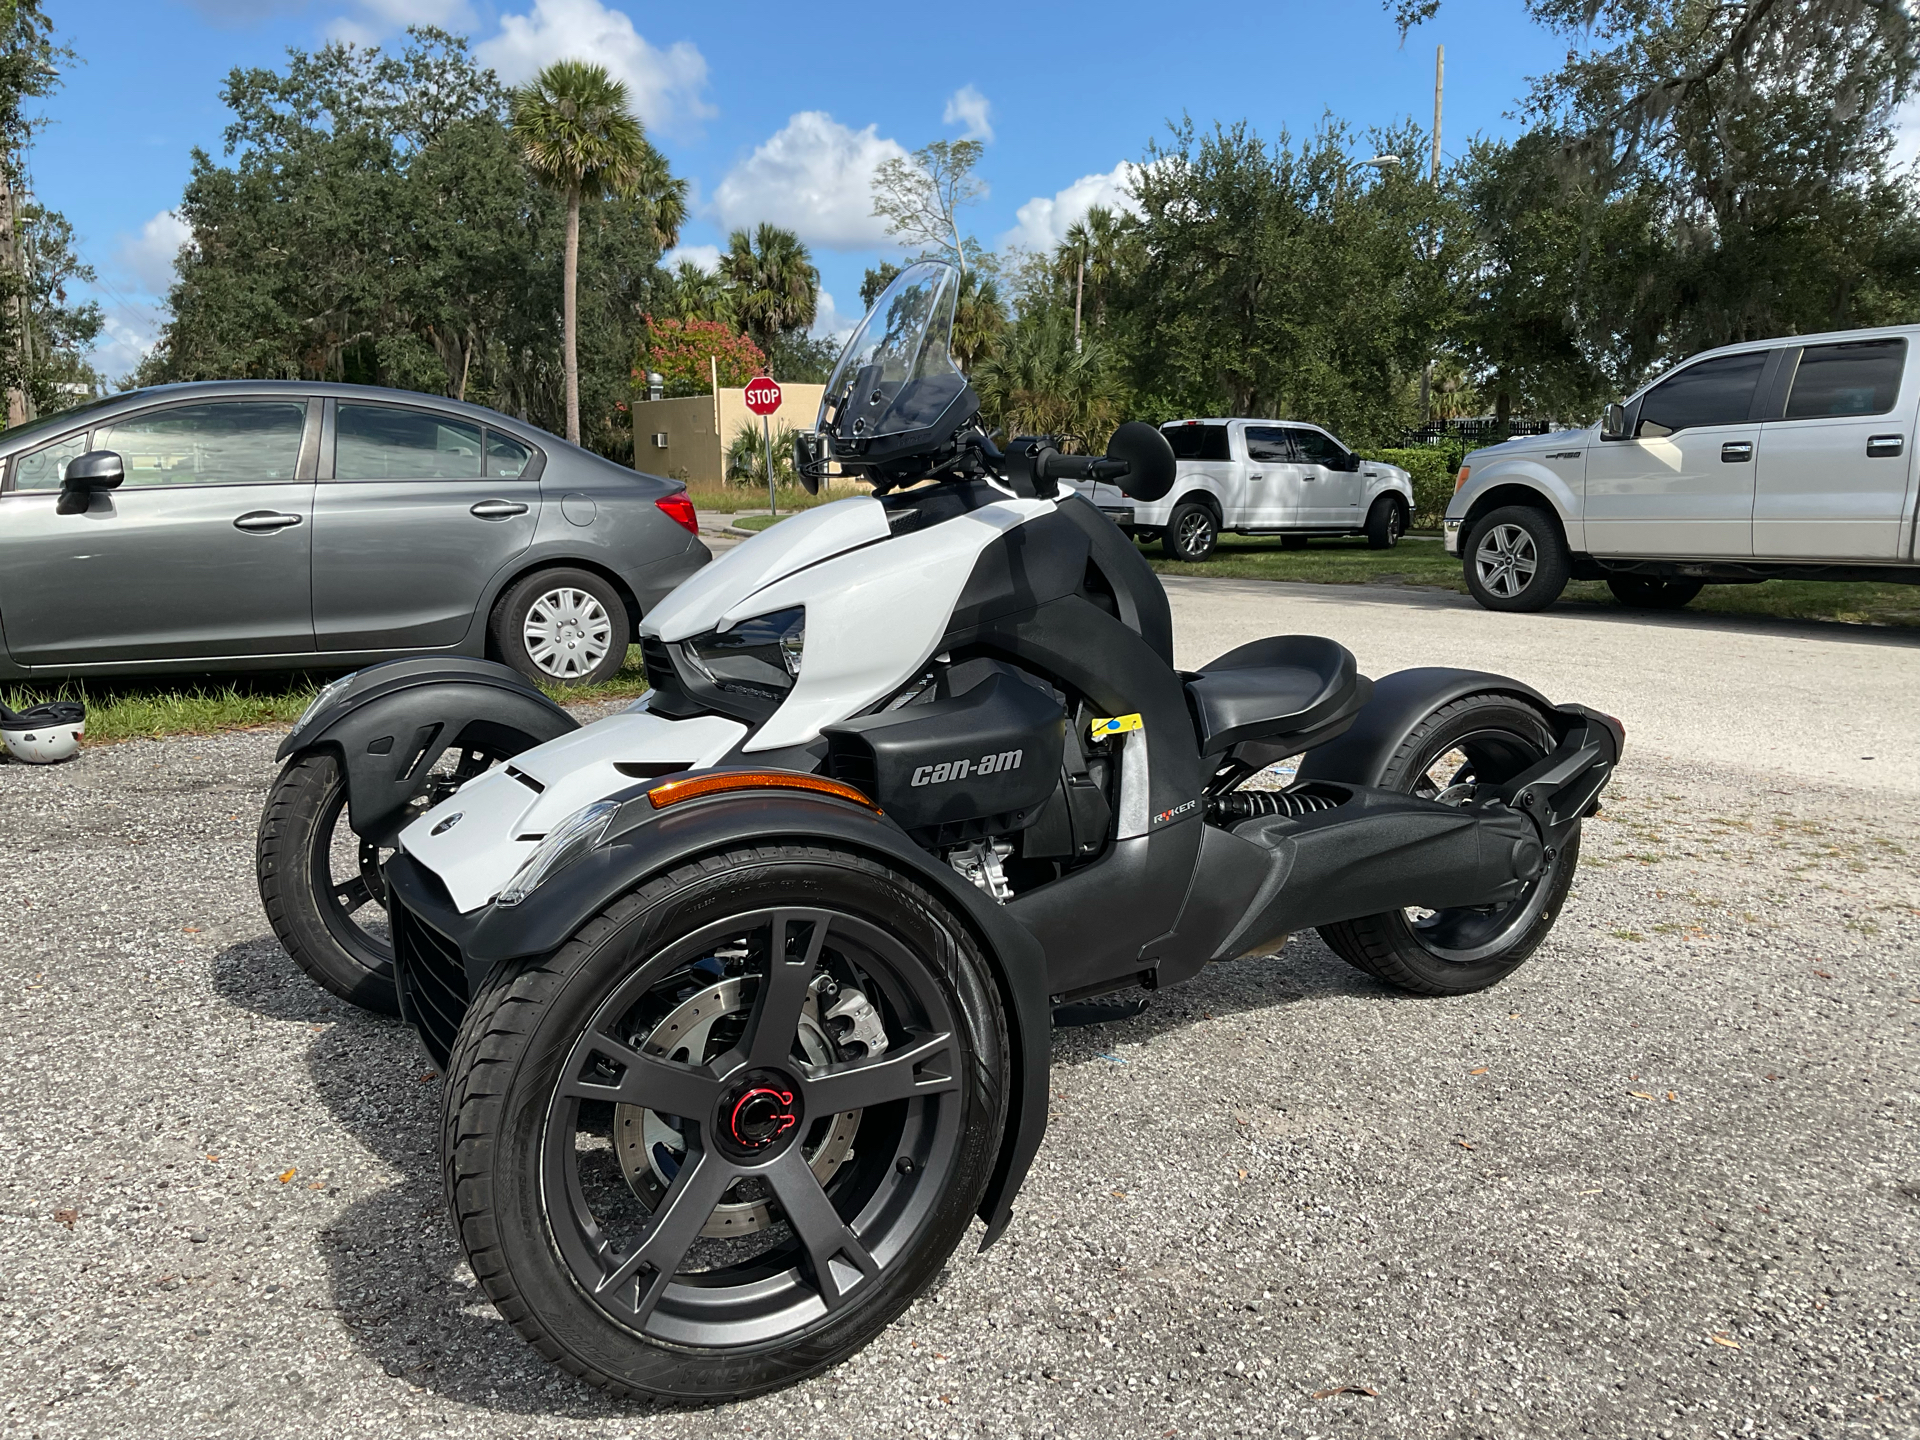 2021 Can-Am Ryker 600 ACE in Sanford, Florida - Photo 6